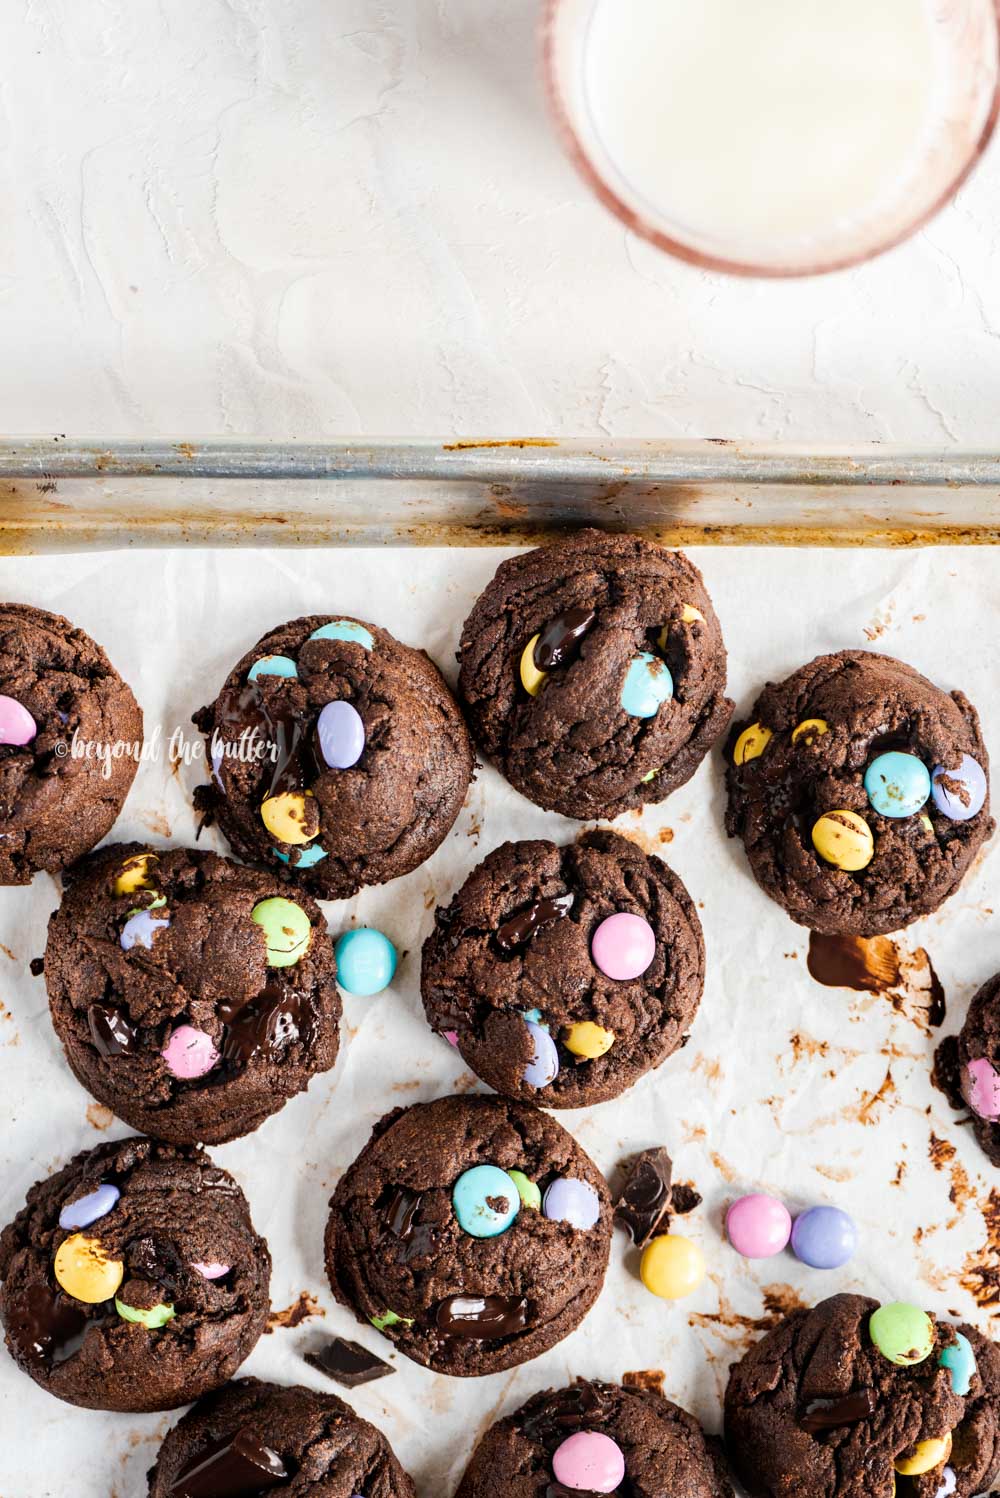 Overhead image of just baked double chocolate chunk m&m cookies on a parchment lined baking sheet and a glass of milk above it | All Images © Beyond the Butter™